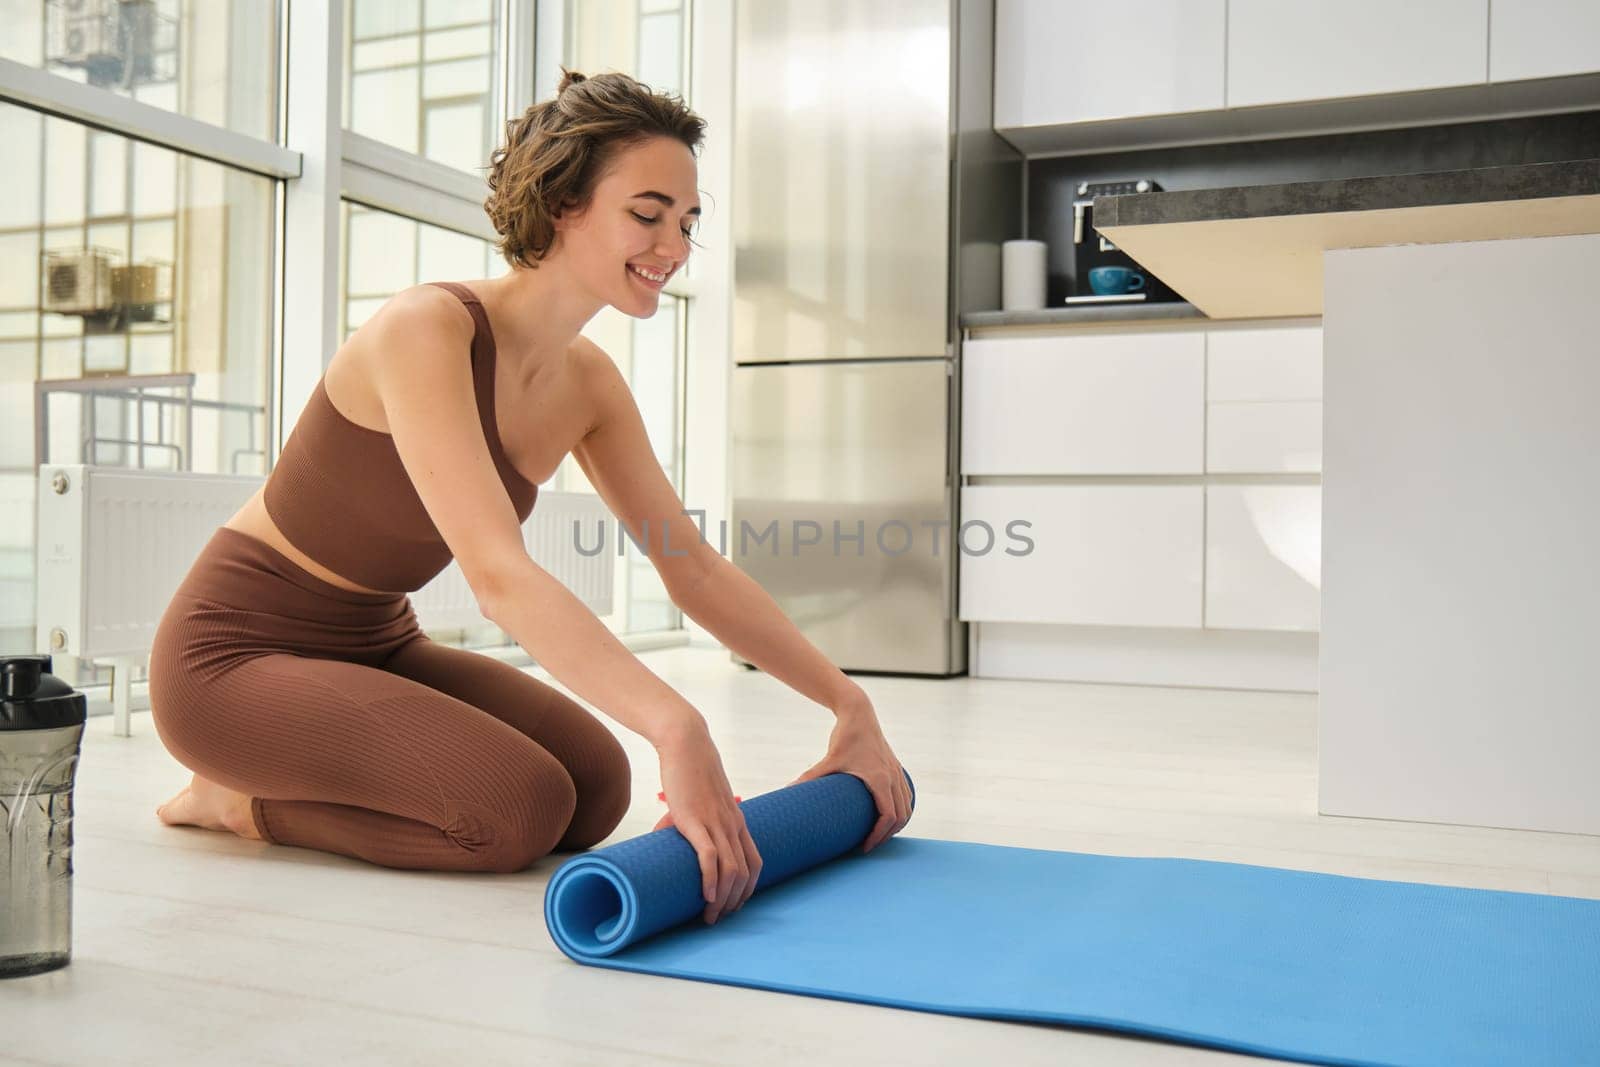 Healthy lifestyle and sport. Fitness woman roll out her yoga matress for workout at home, prepare water bottle. Girl does sports indoors, wears activewear, prepares for training session by Benzoix